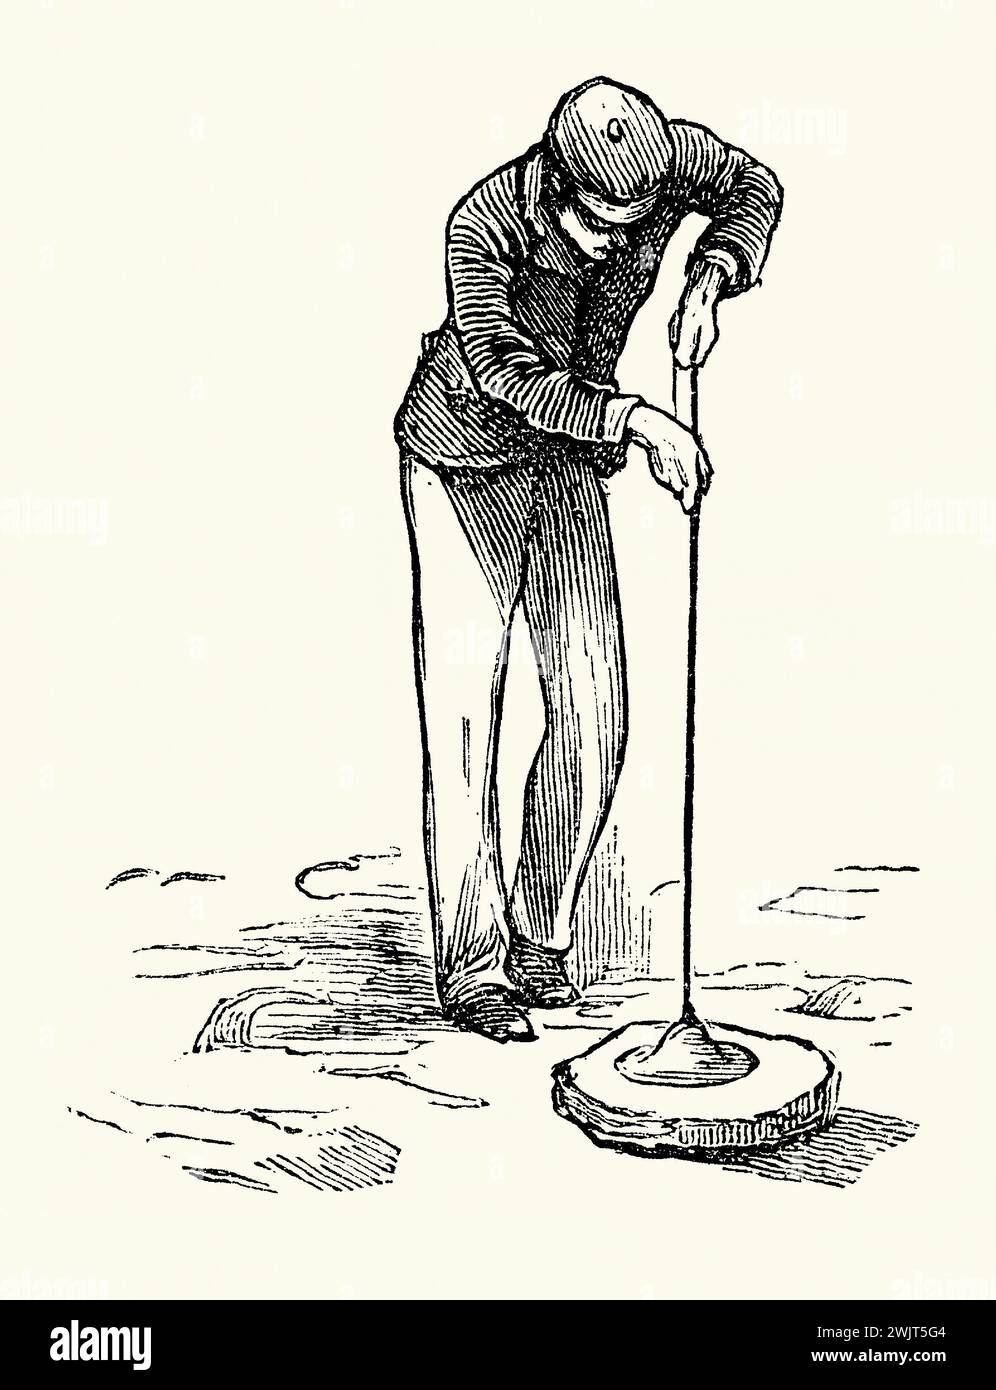 An old engraving of a man using a ‘sucker’ to lift a flat stone in the 1800s. It is from Victorian book of the 1890s on sports, games and pastimes. The device is made of a circular piece of leather with a string attached at its centre. The leather is moistened and is pressed flat against the stone. Once it adheres to the surface it can be pulled up using the string. The leather forms a bell shape with very little air within it – the partial vacuum created means the stone is lifted up off the ground. Today’s vacuum suction lifters are commonly used to move sheet material like sheet glass. Stock Photo